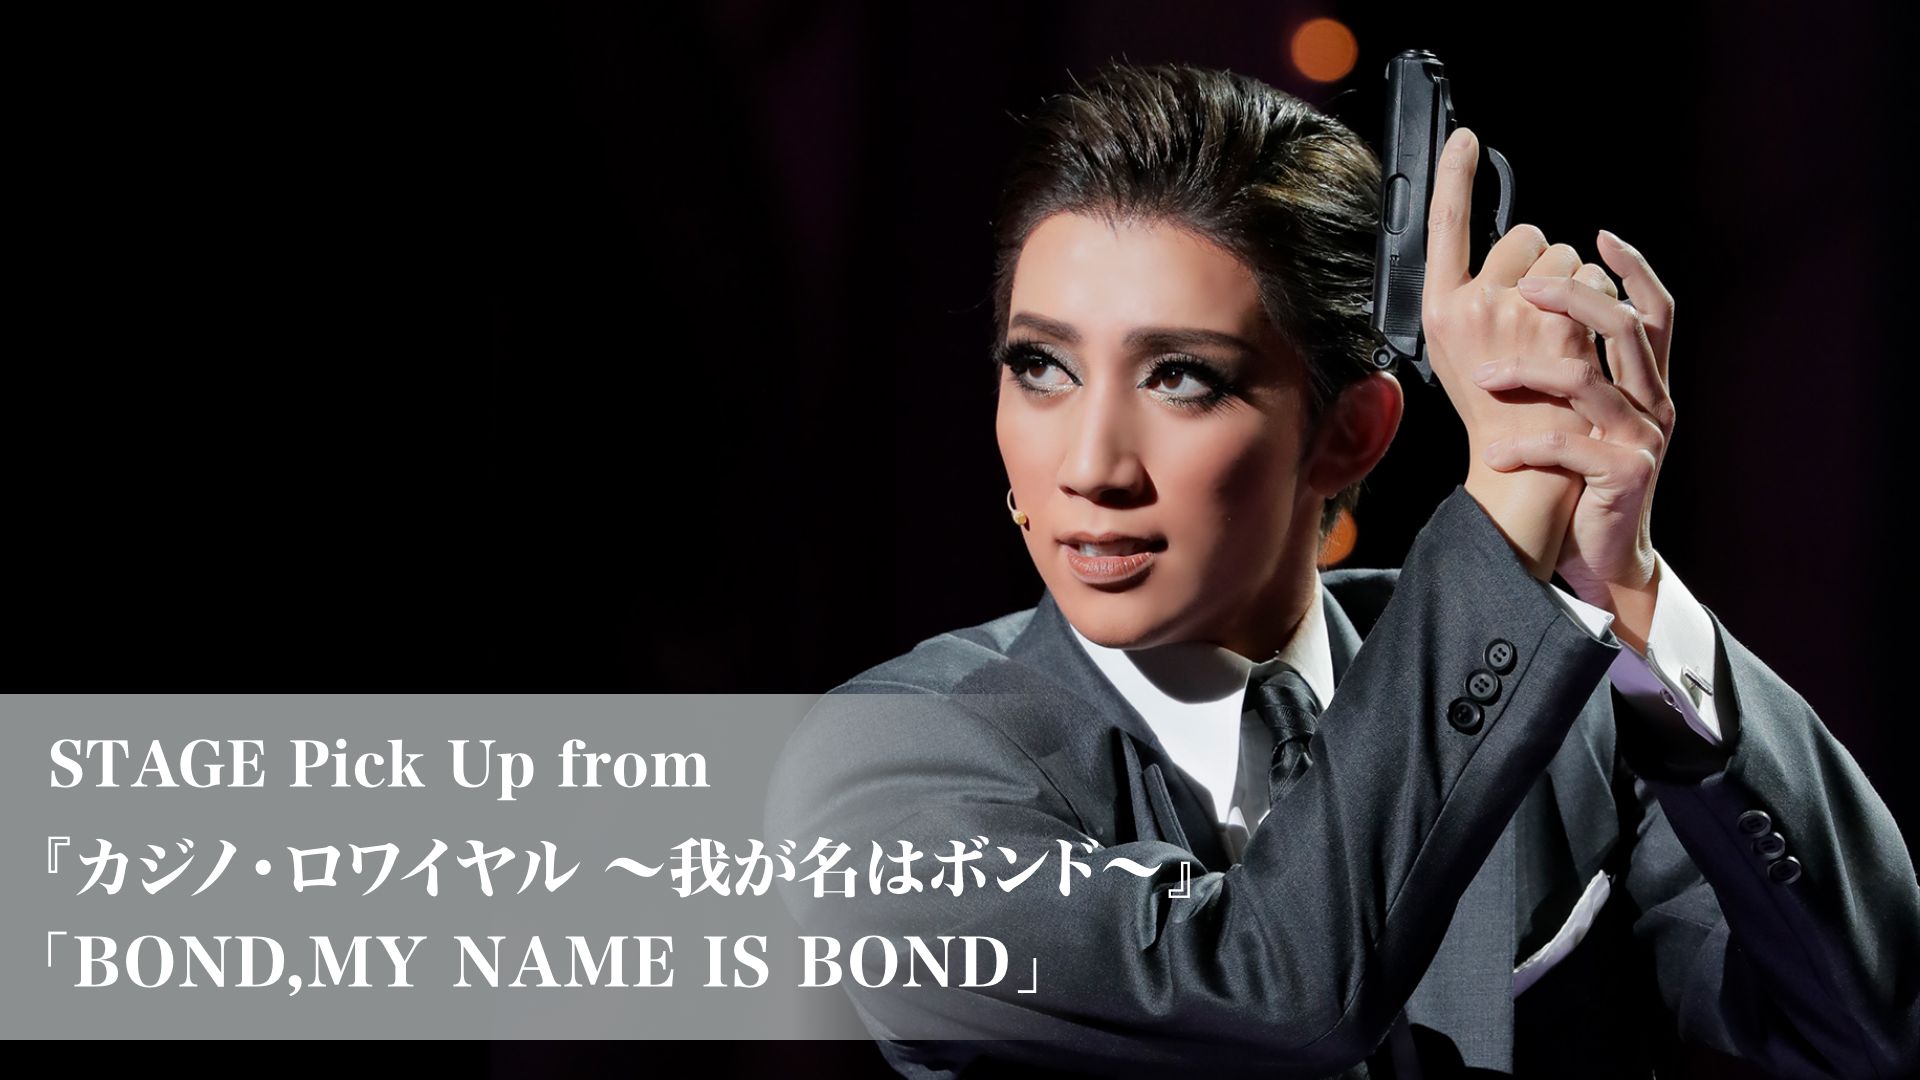 STAGE Pick Up from 『カジノ・ロワイヤル 〜我が名はボンド〜』「BOND,MY NAME IS BOND」